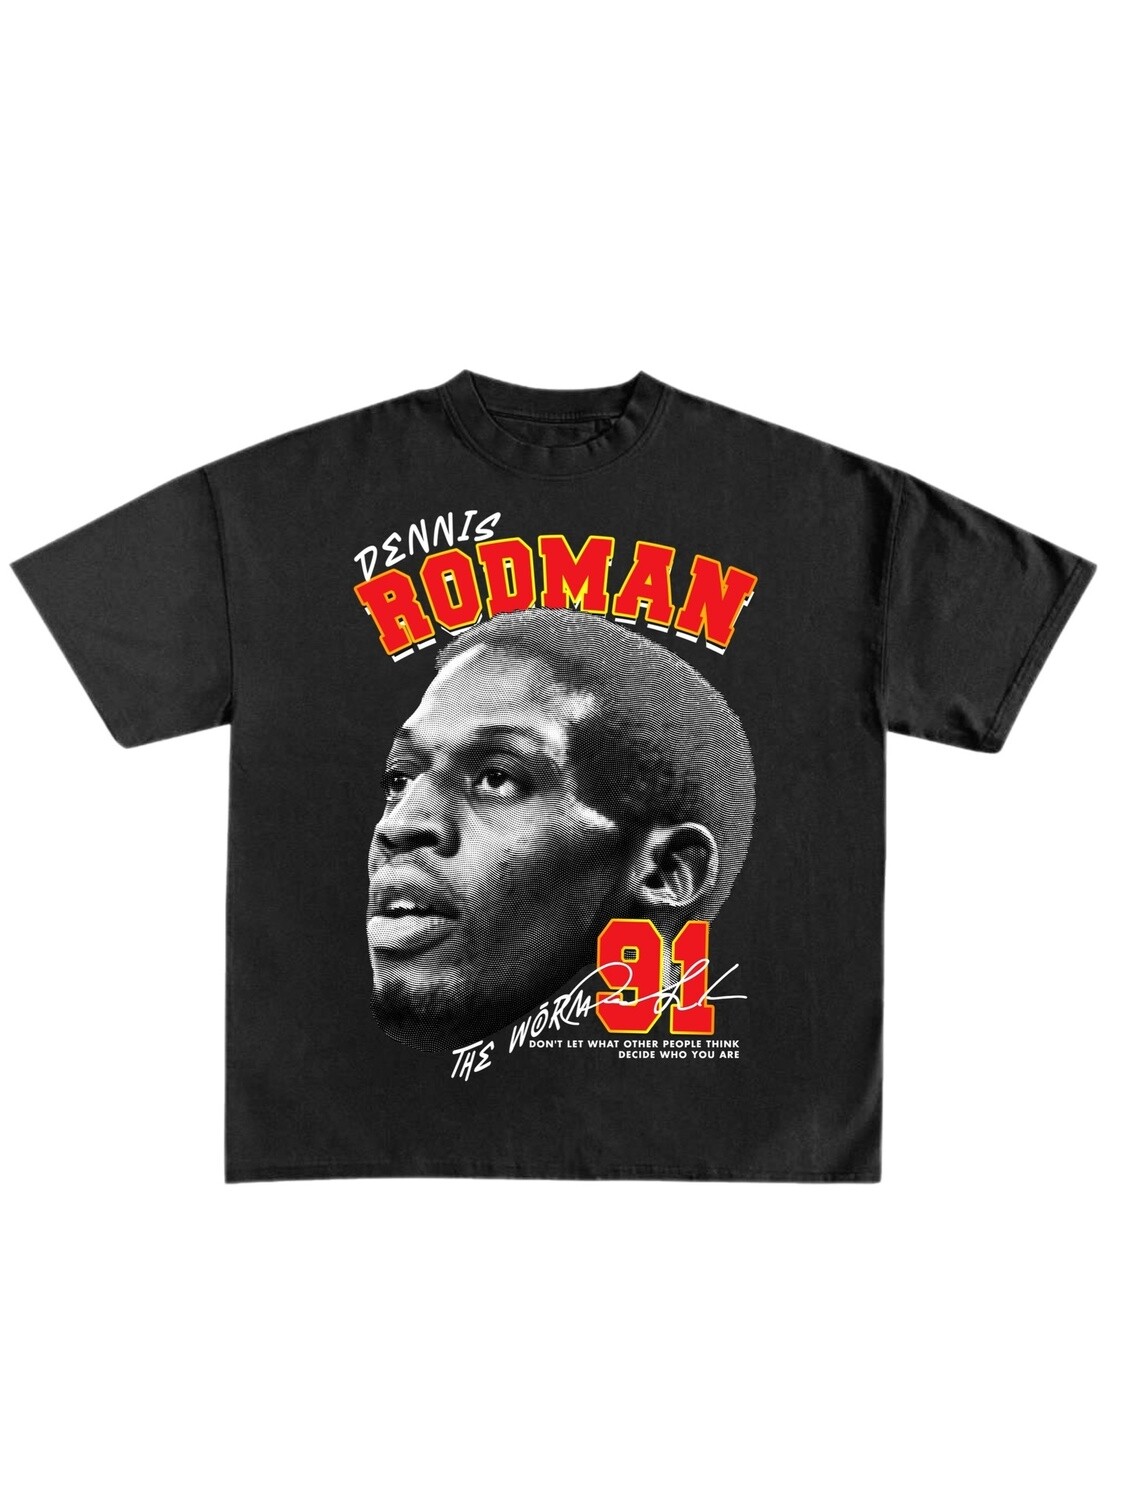 T-shirt Ghost Country Dennis Rodman, Size: Large